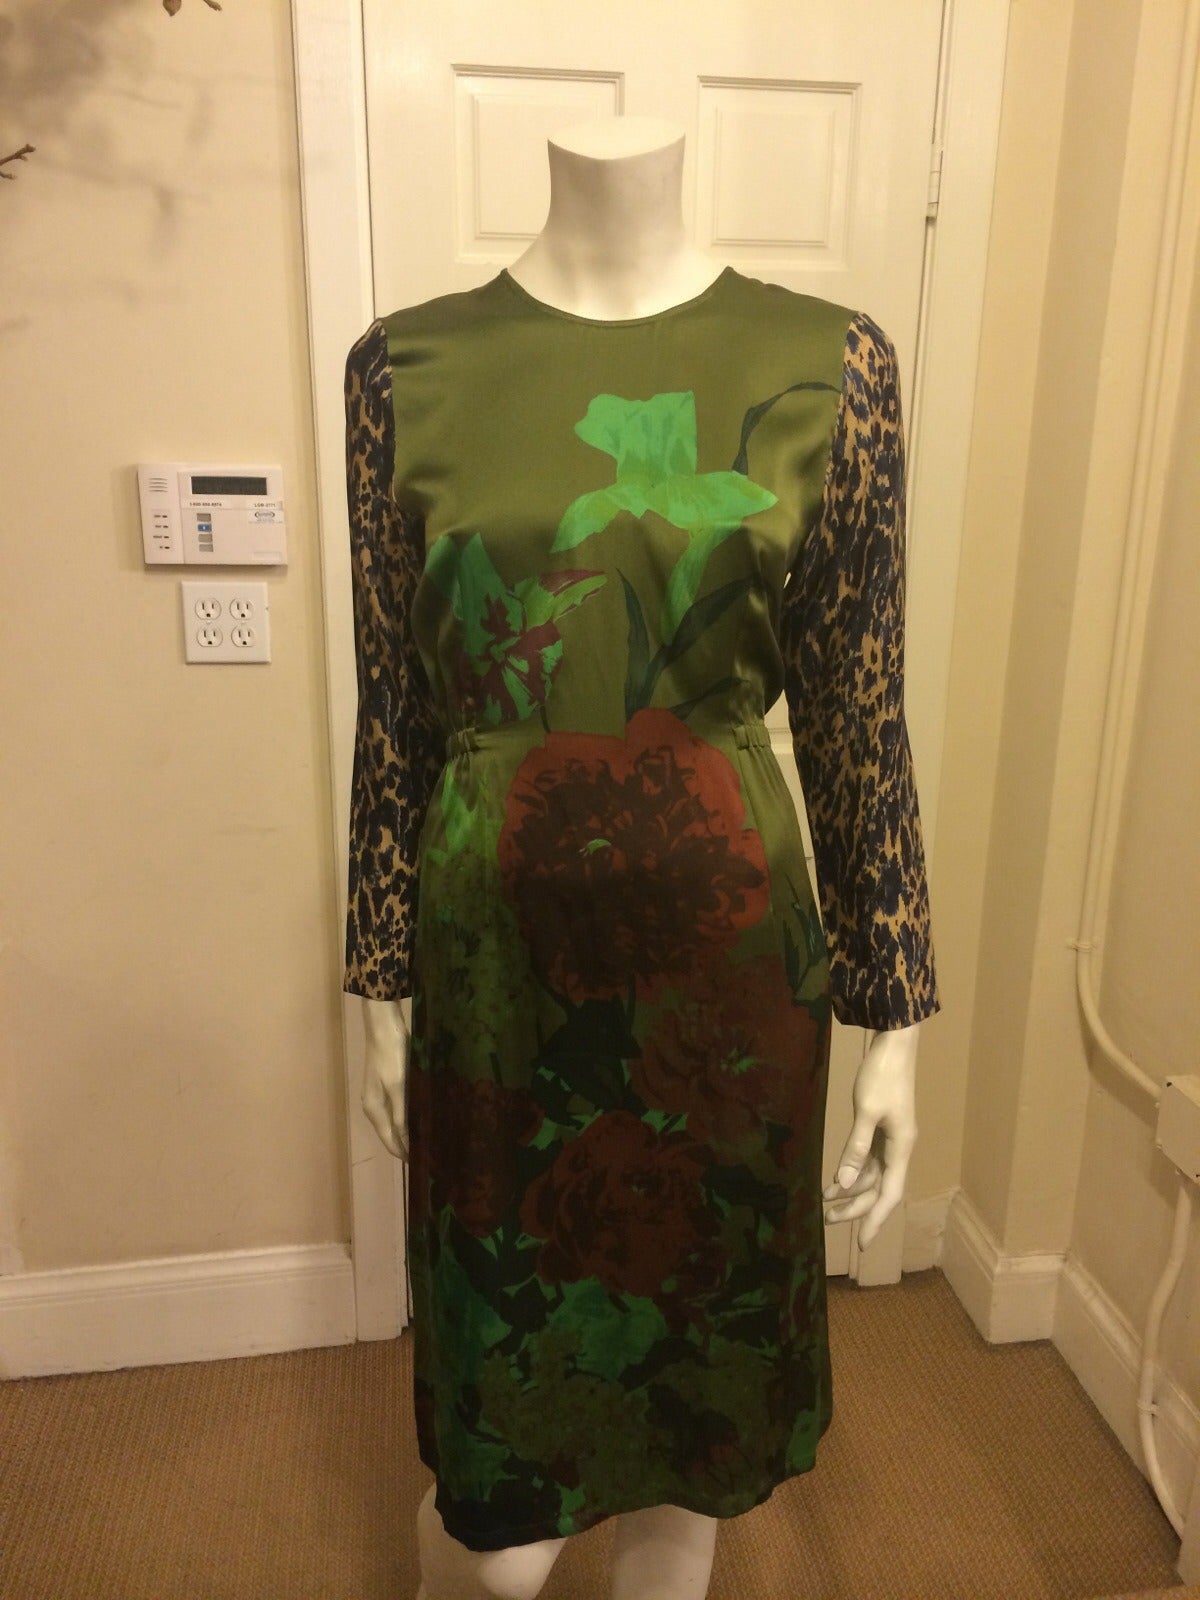 This gorgeous green floral silk dress by Dries Van Noten gets an edgy twist by having contrasting animal print sleeves in beige and navy blue.  The elastic that wraps around the back gives a flattering waistline while maintaining the easy flow of